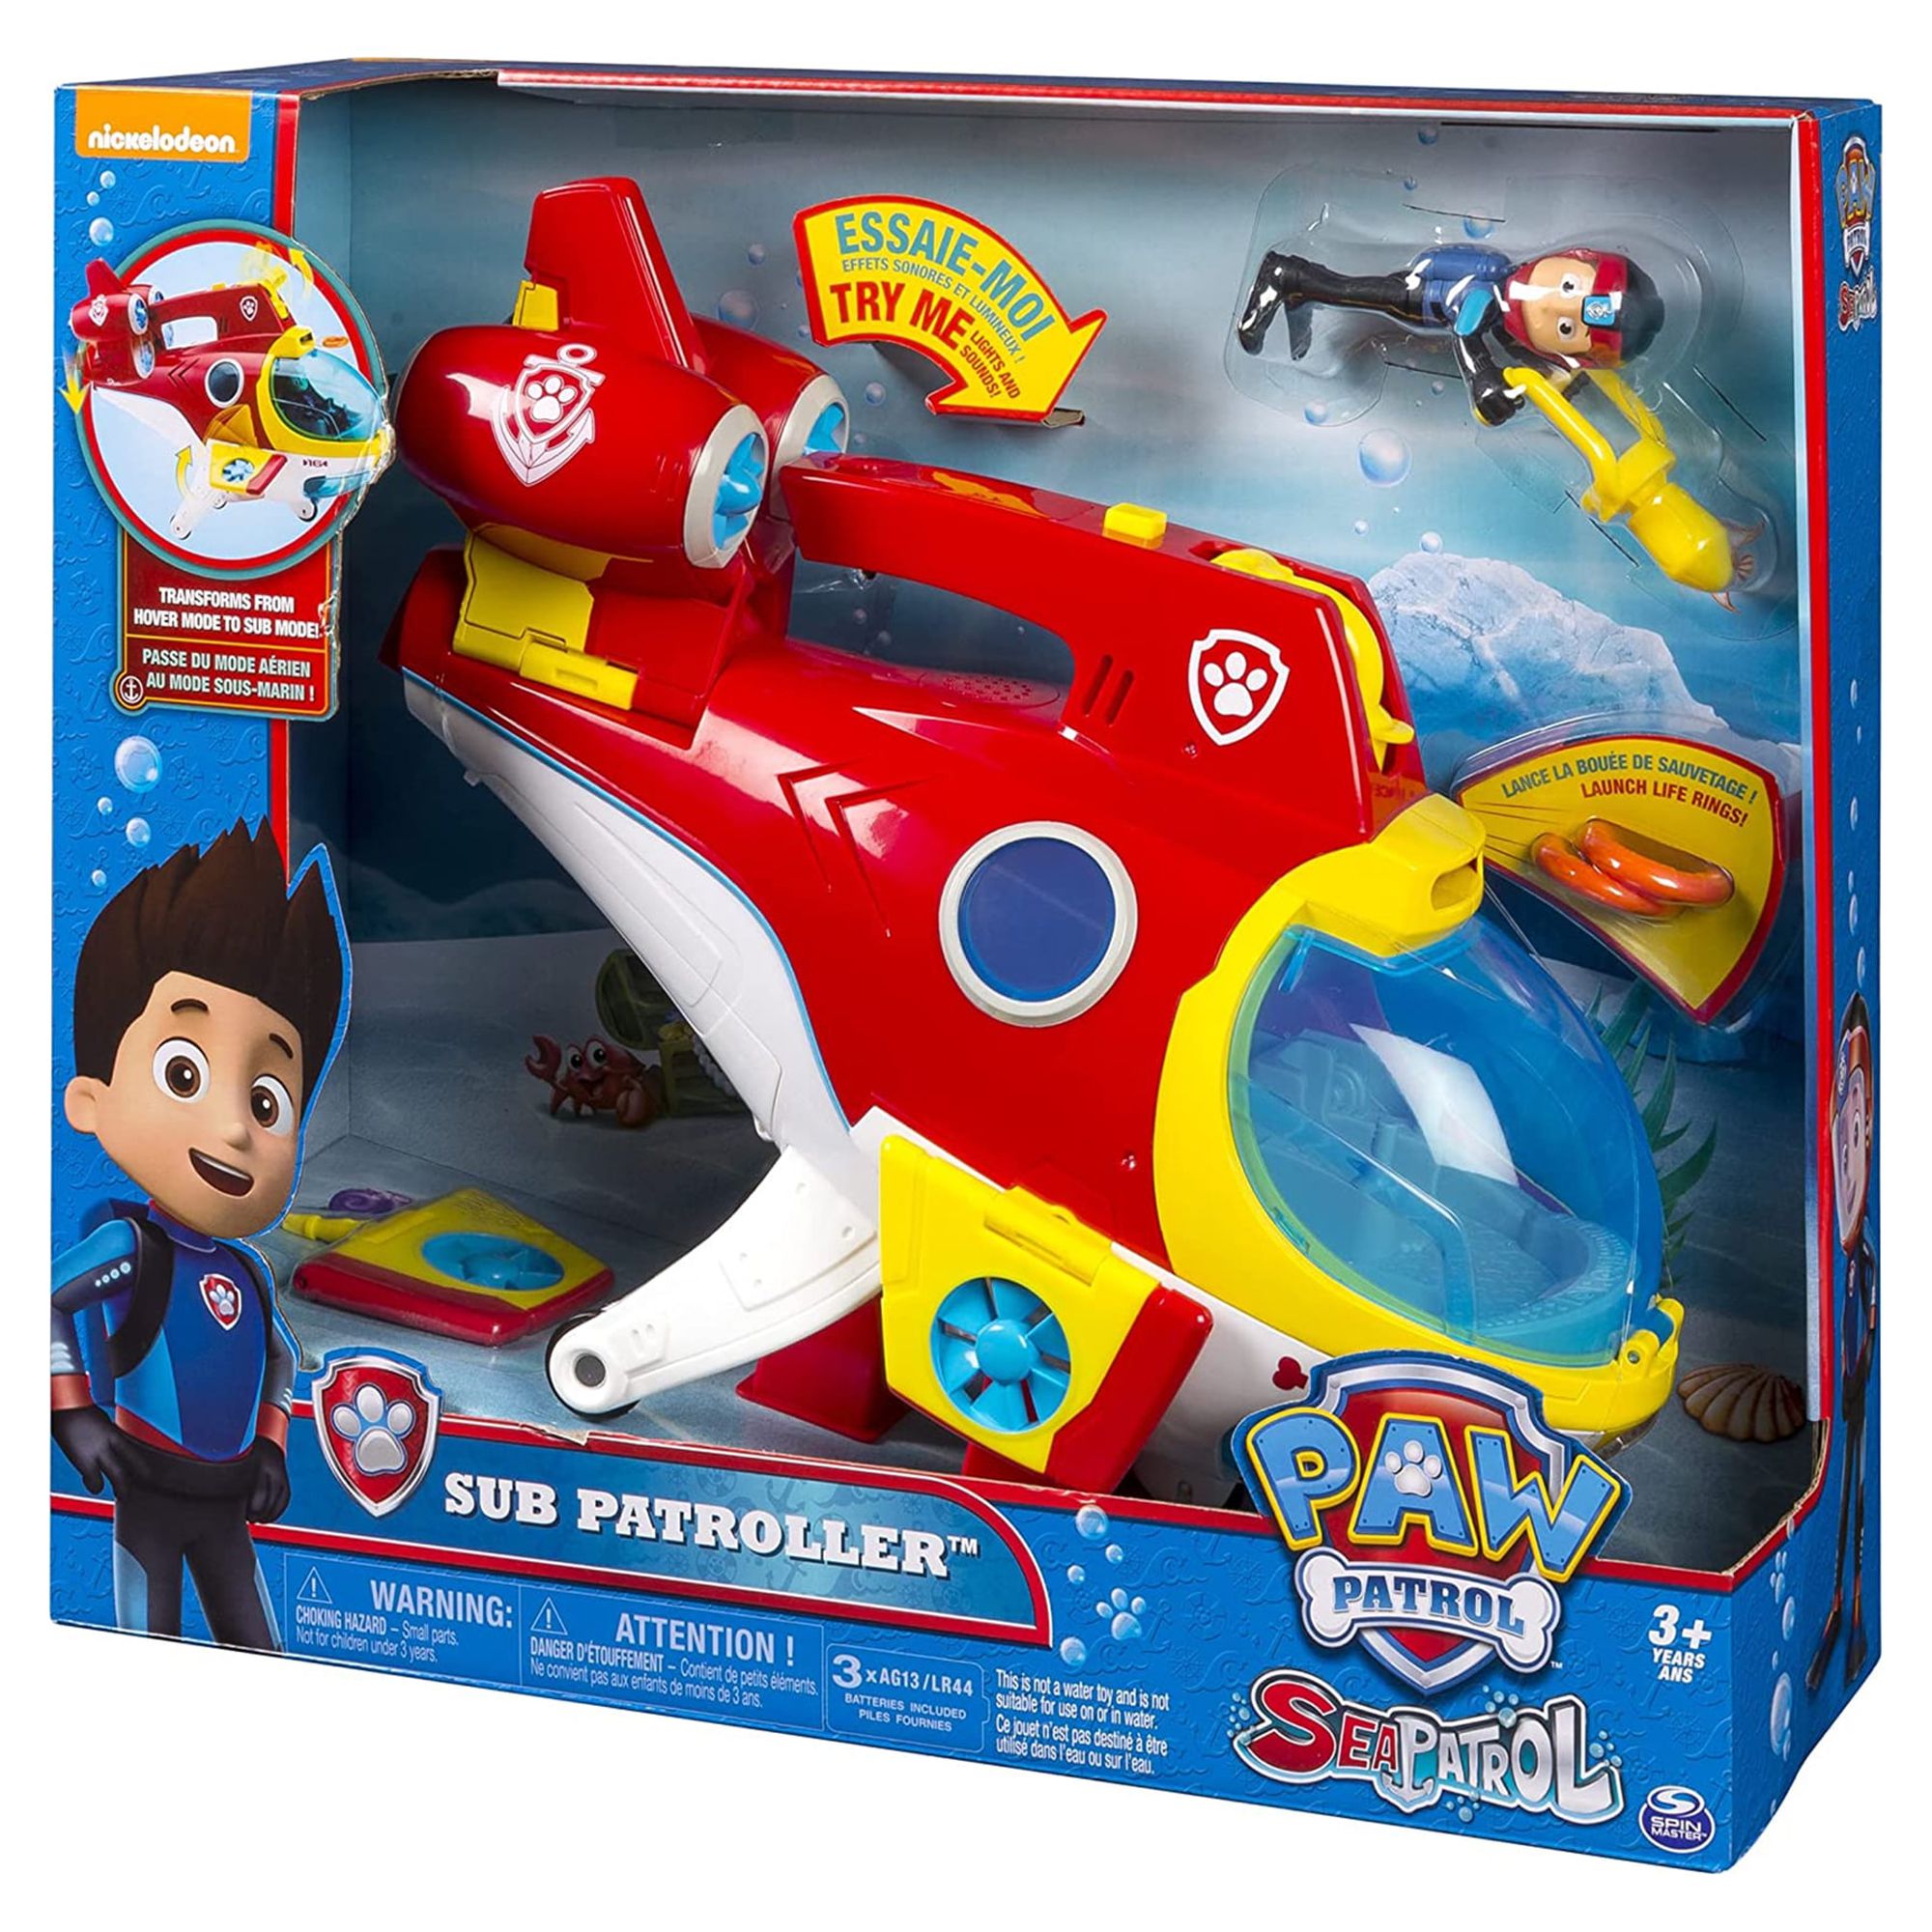 Paw Patrol Sub Patroller Air to Sea Vehicle with Lights, Sounds & Launcher - image 8 of 8